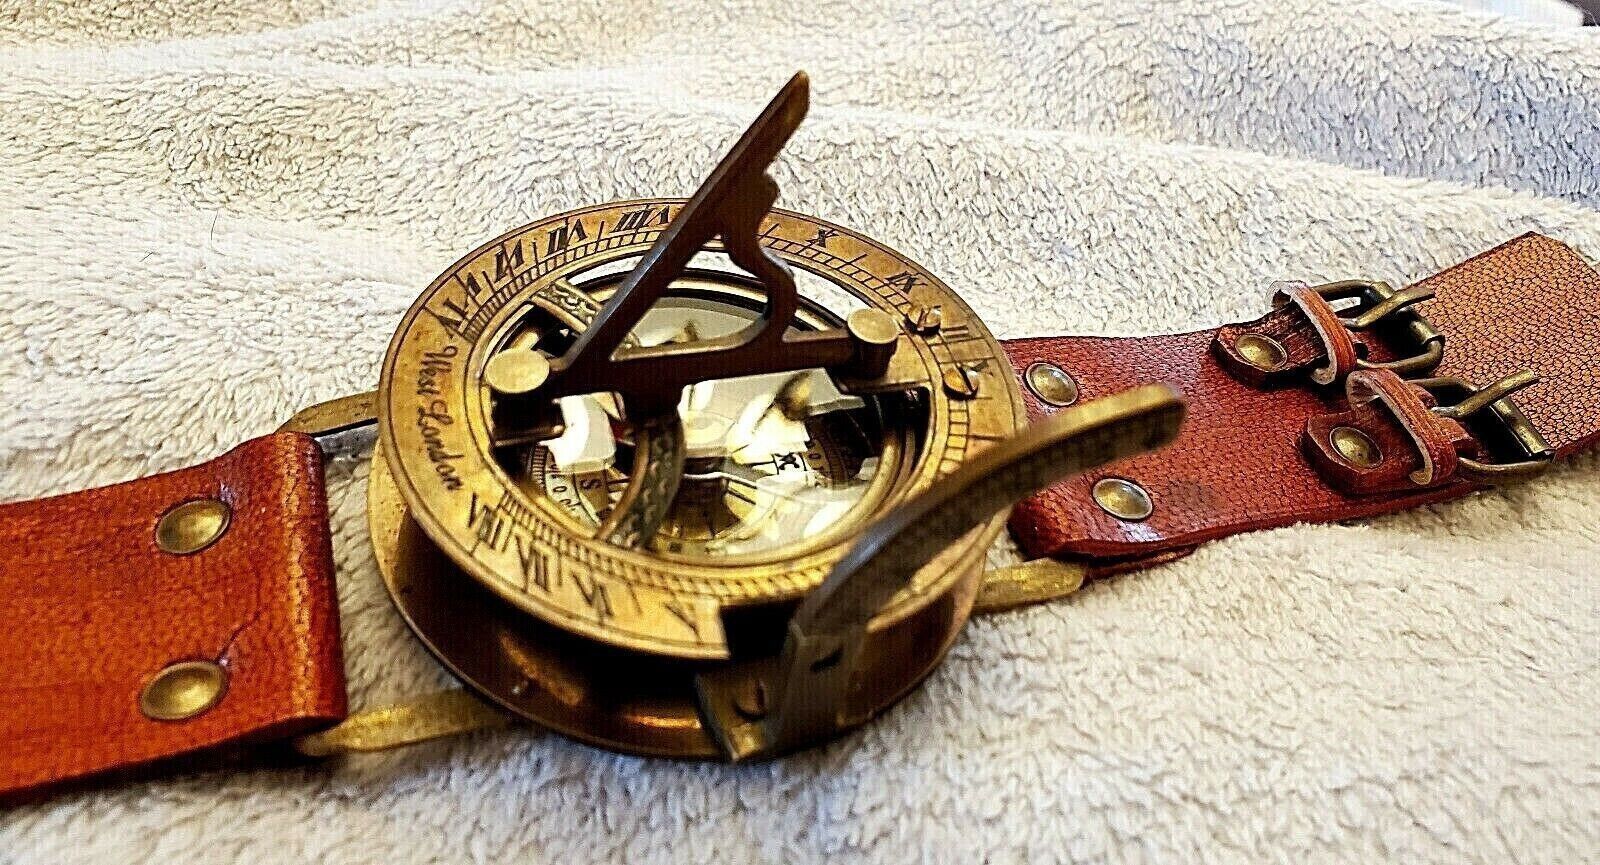 Primary image for Vintage Old Style WWII Military Wristwatch Brass Round Sundial Compass Gift.